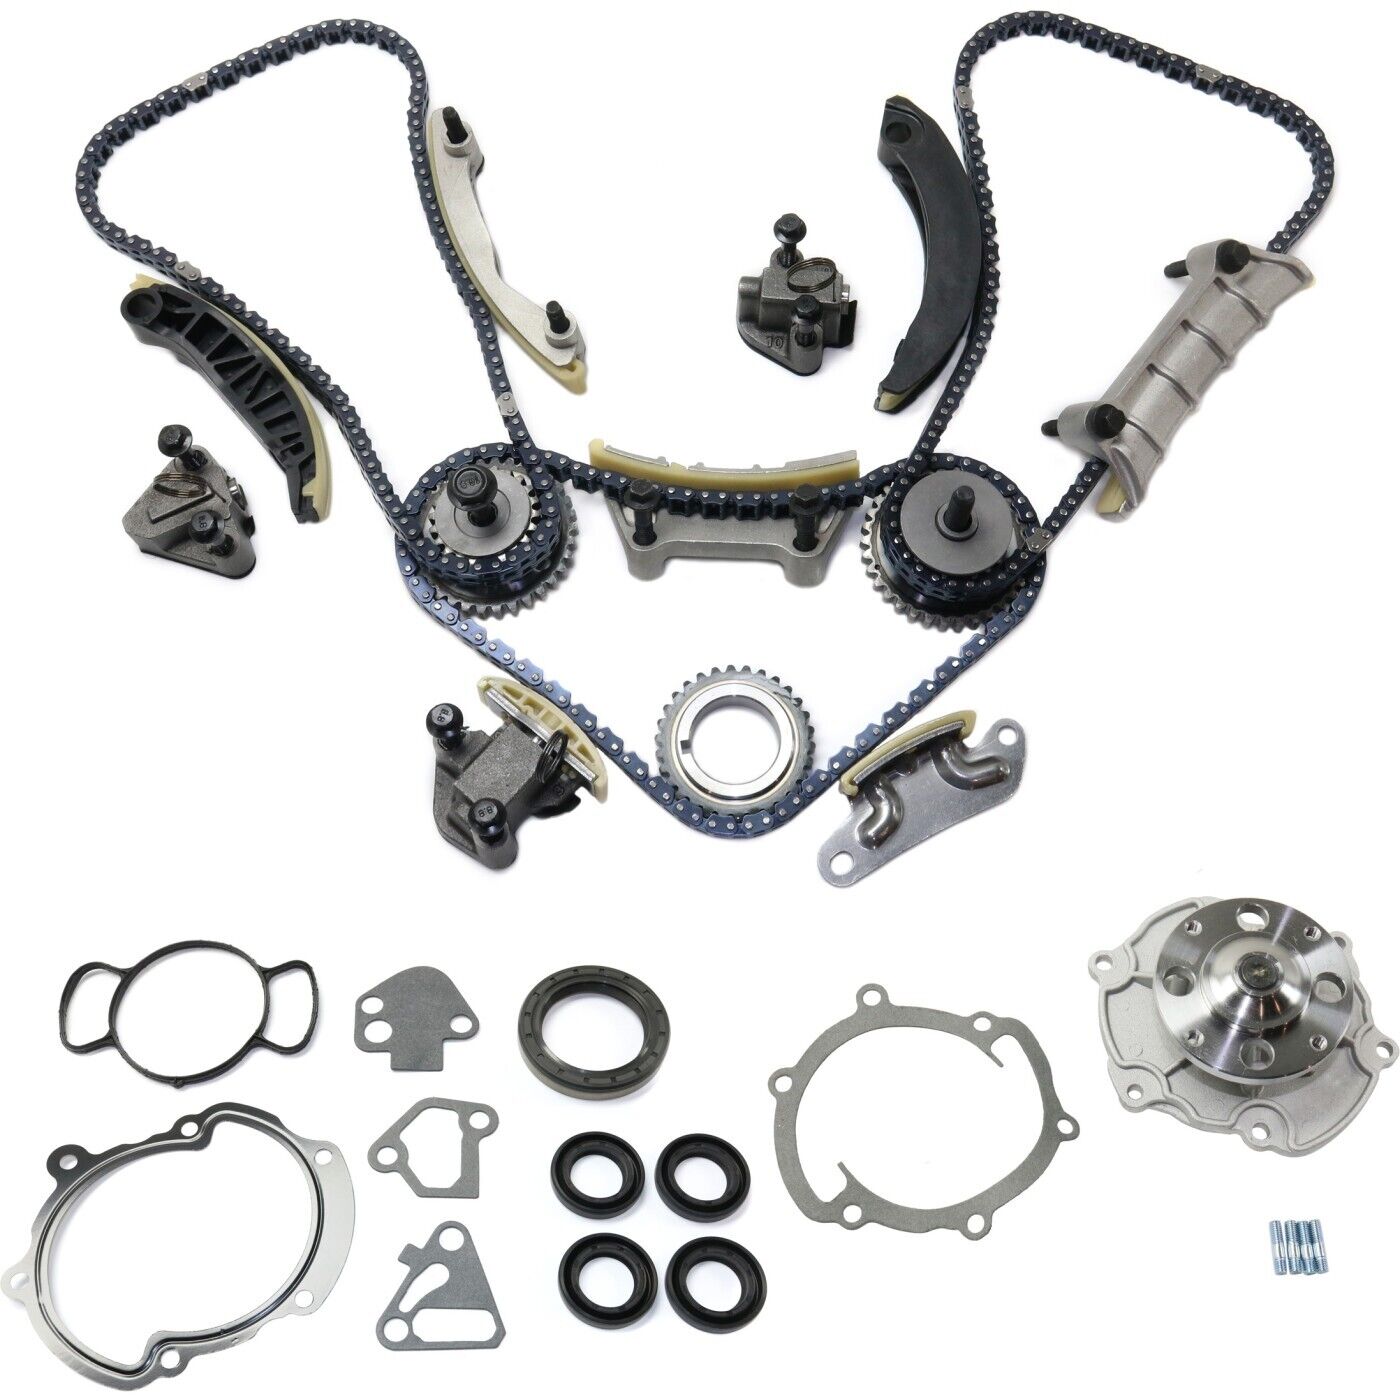 Timing Chain Kit For 2008-15 Chevrolet Equinox 3.0 3.6L with Timing Cover Gasket